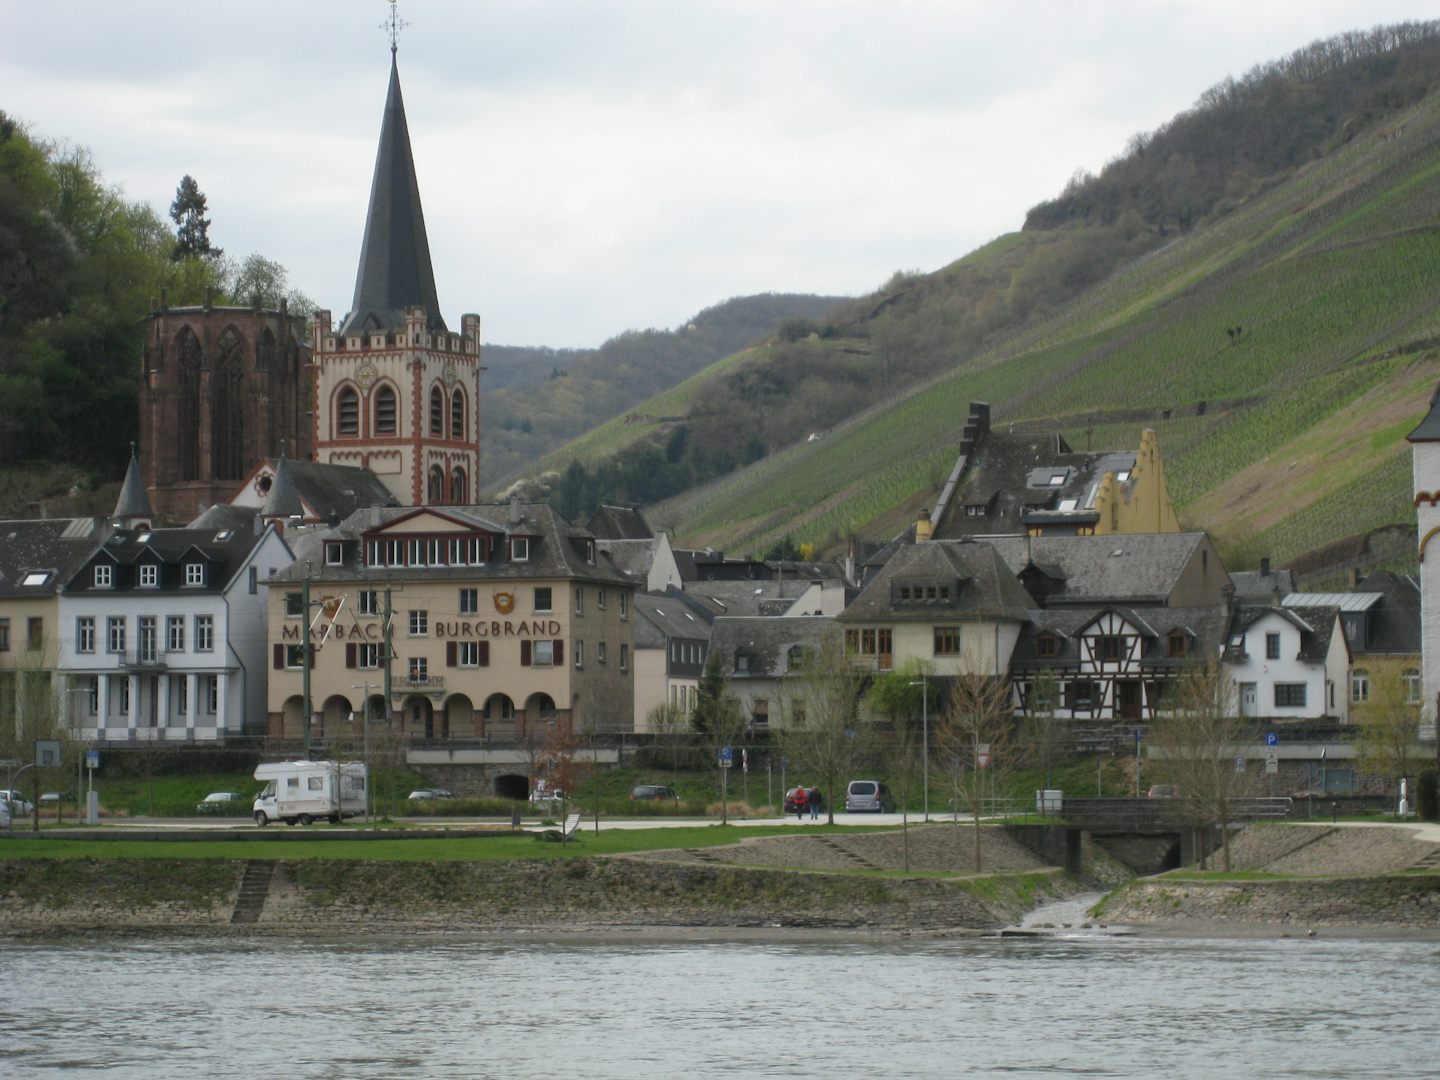 View from ship, sailing down the Rhine River